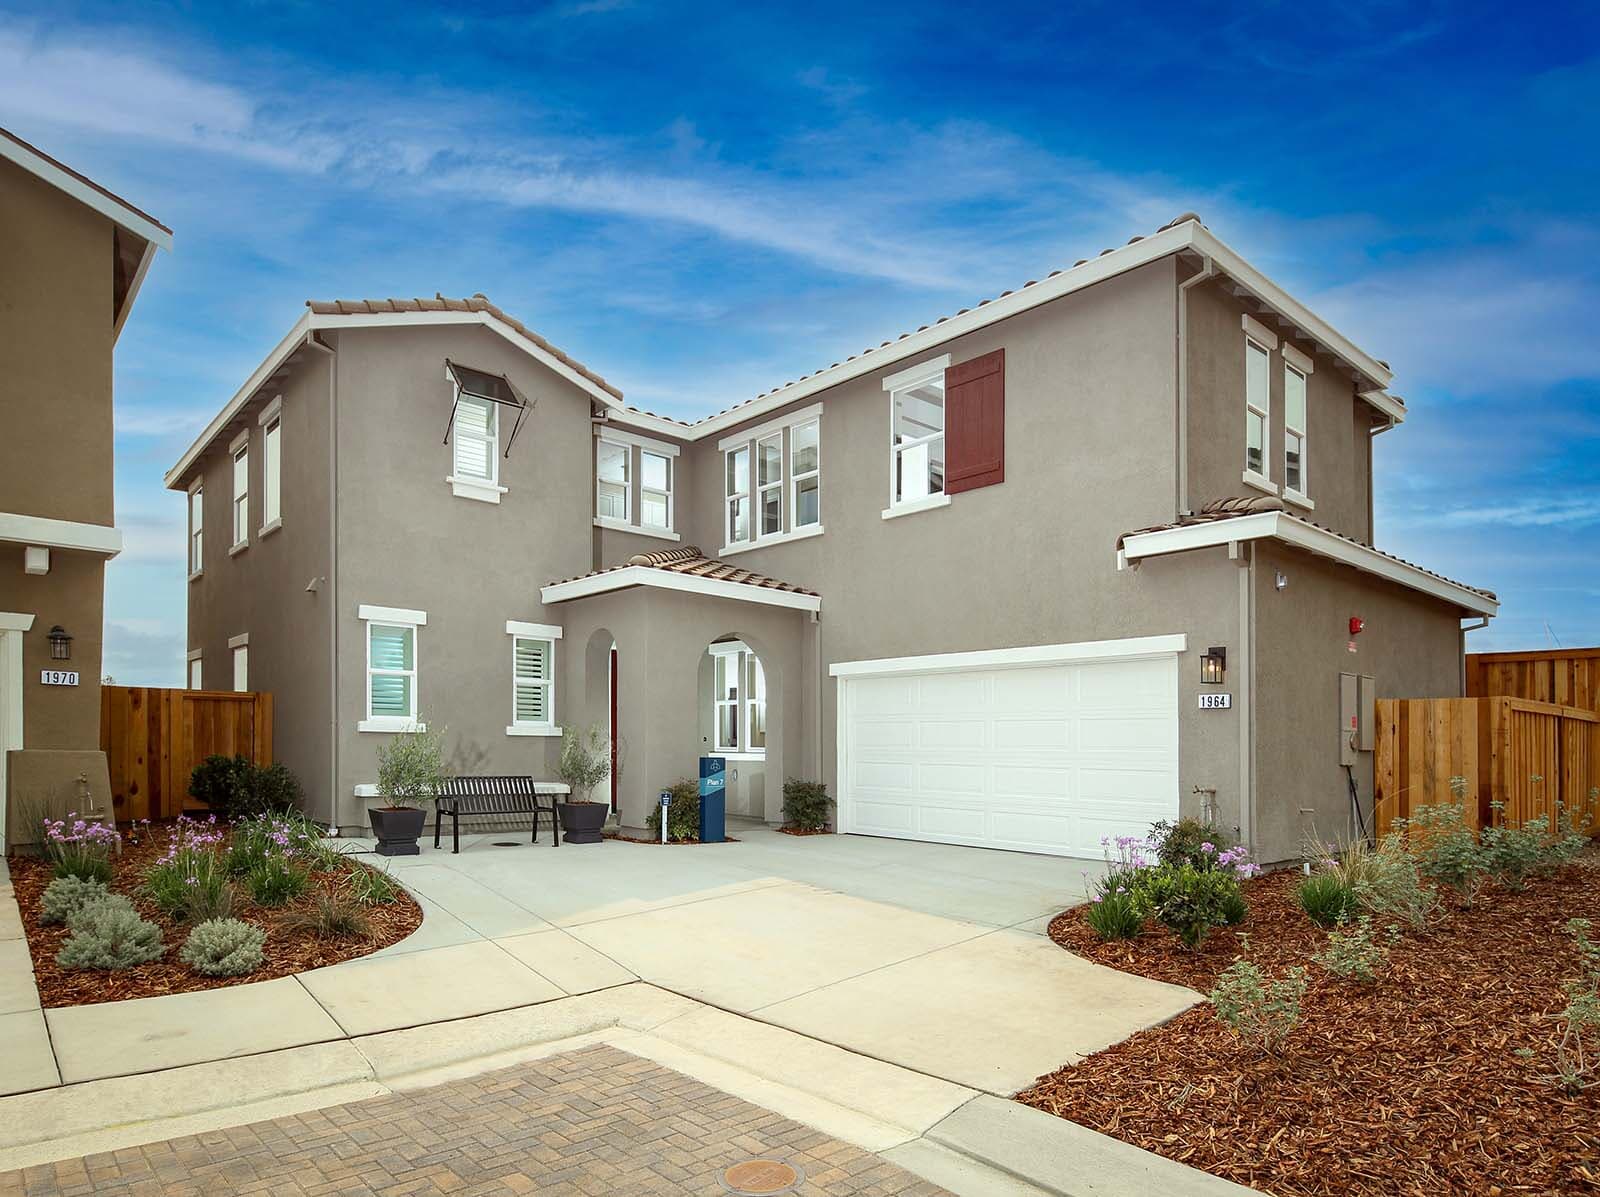 New Construction Homes in the East Bay Area | Brookfield Residential